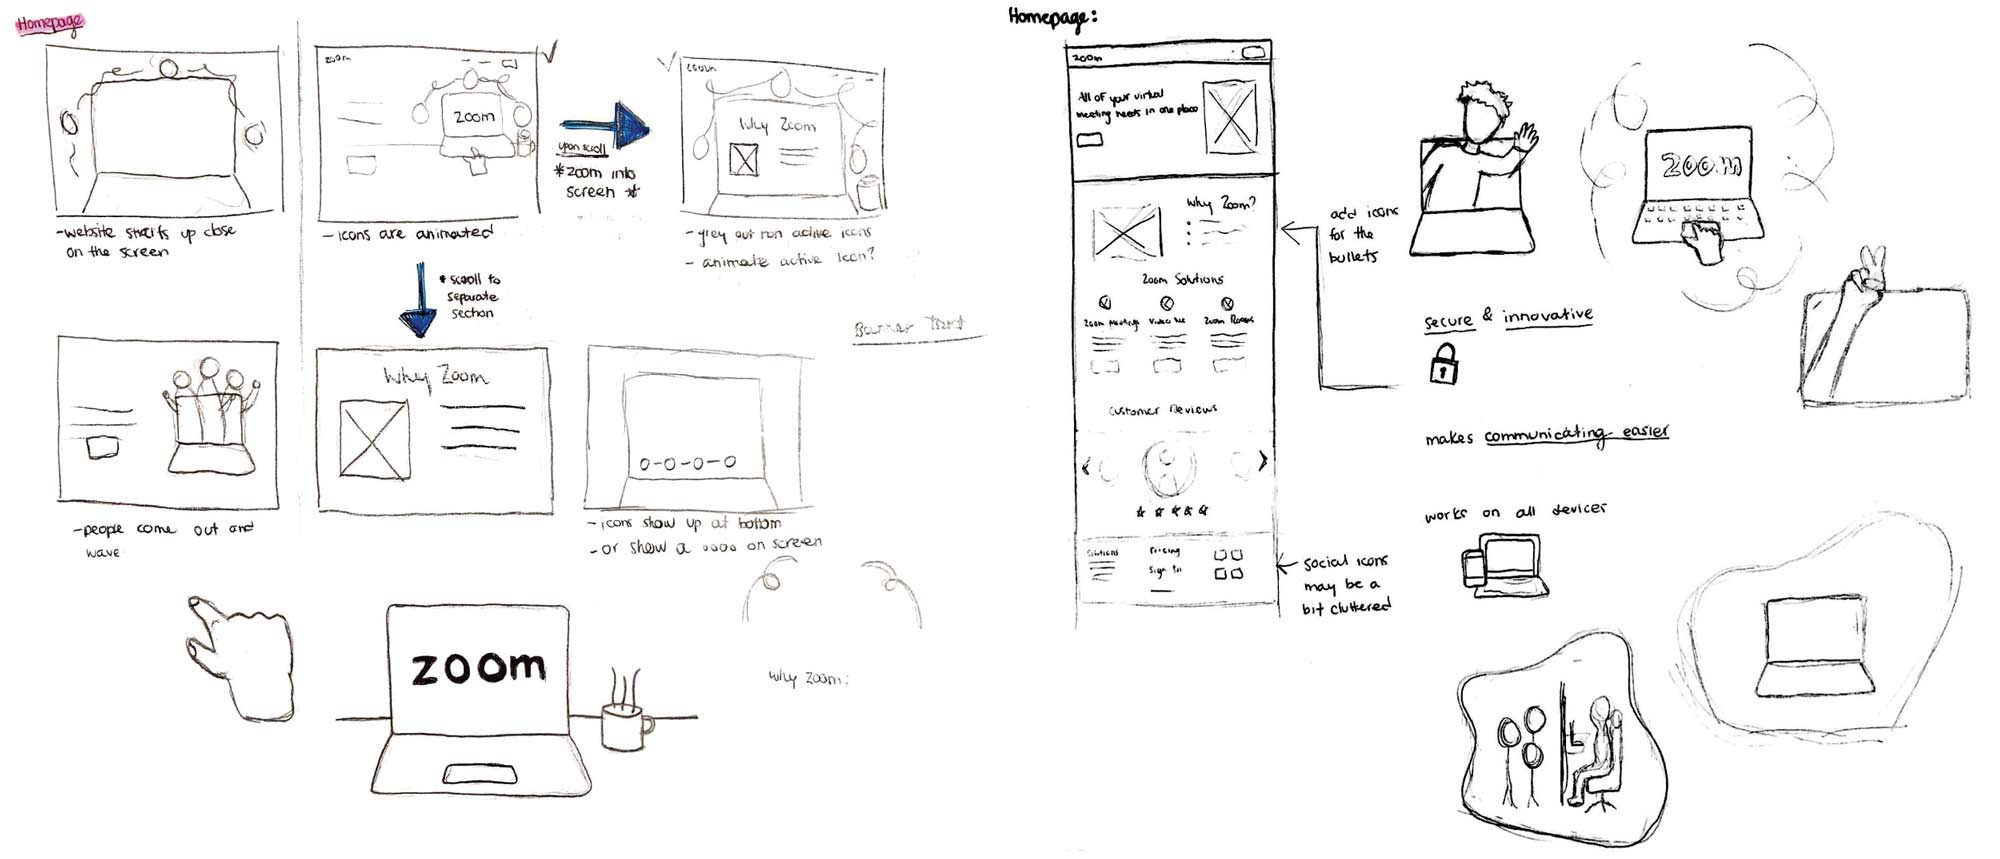 This is an image of the sketches that I did for the new illustrations and the new website layout